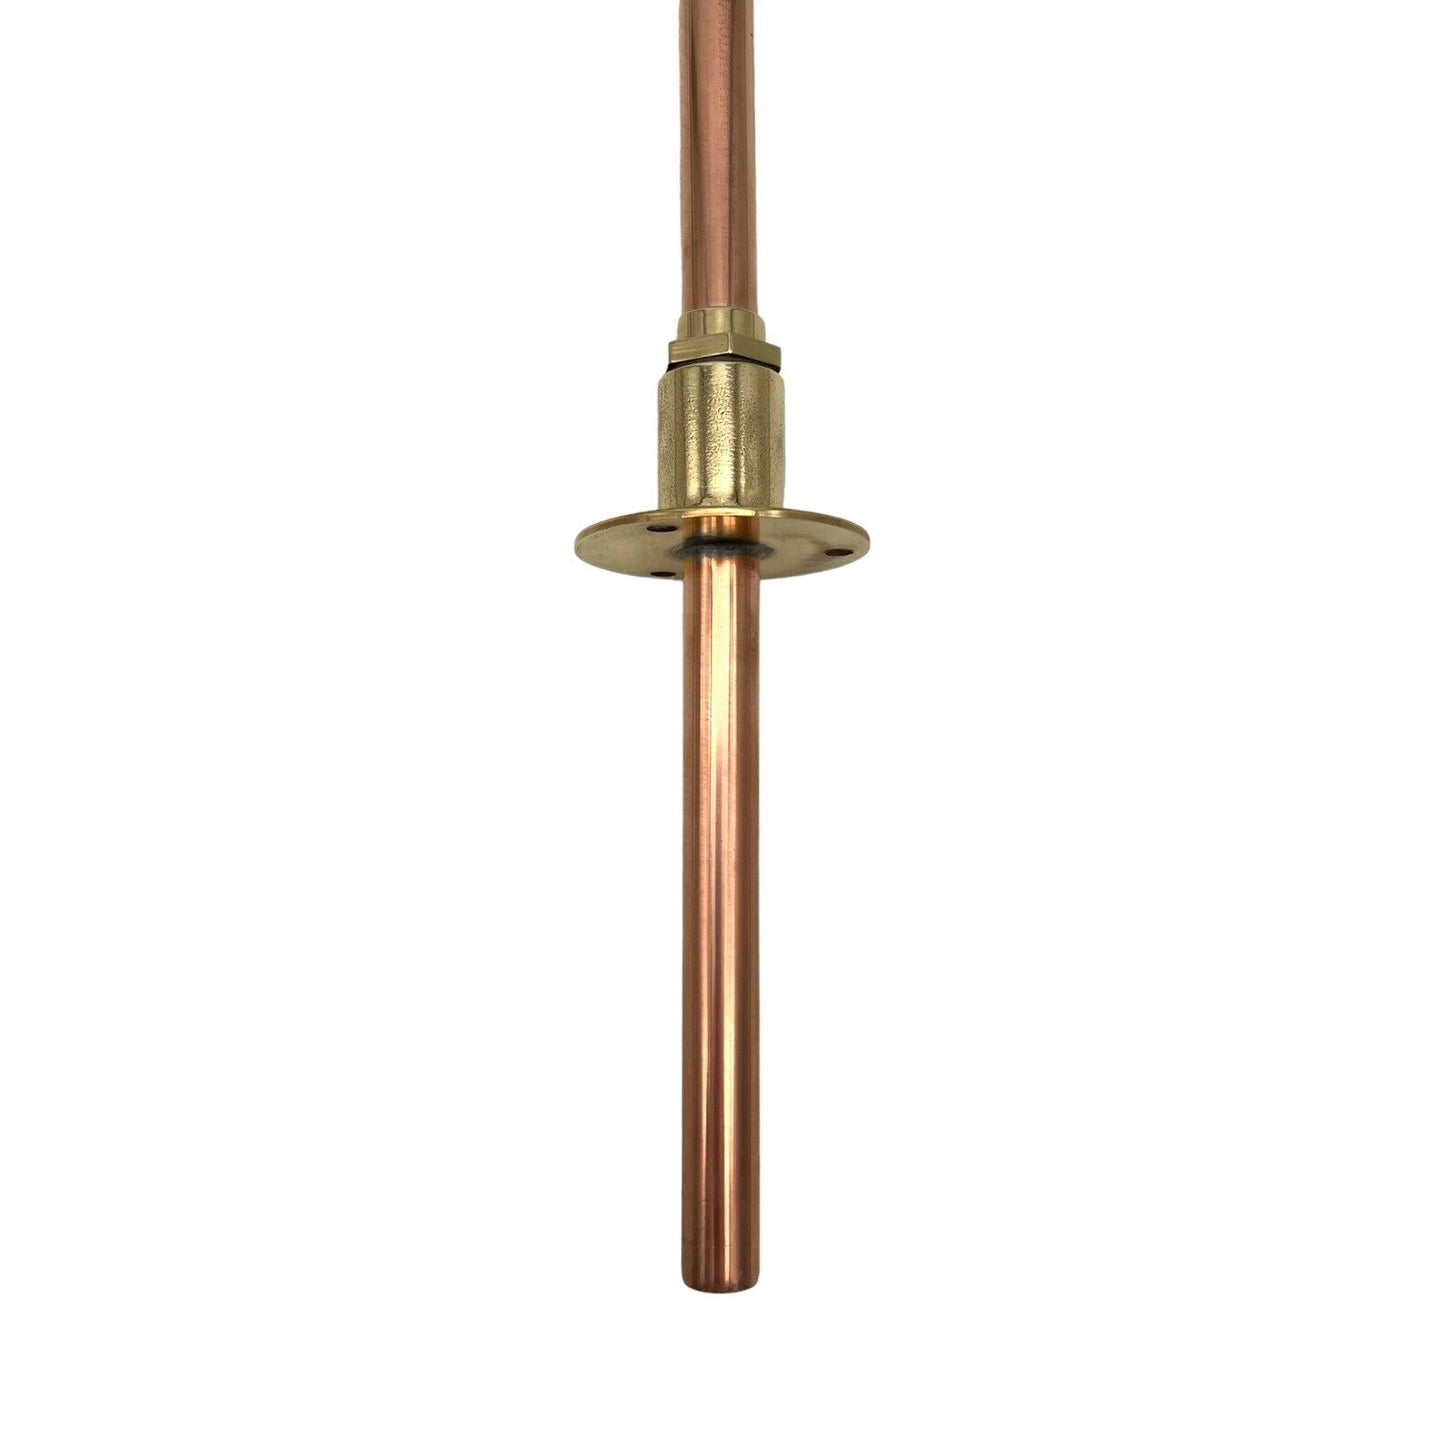 image 10 Copper and brass handmade tap faucet sold by All Things French Store